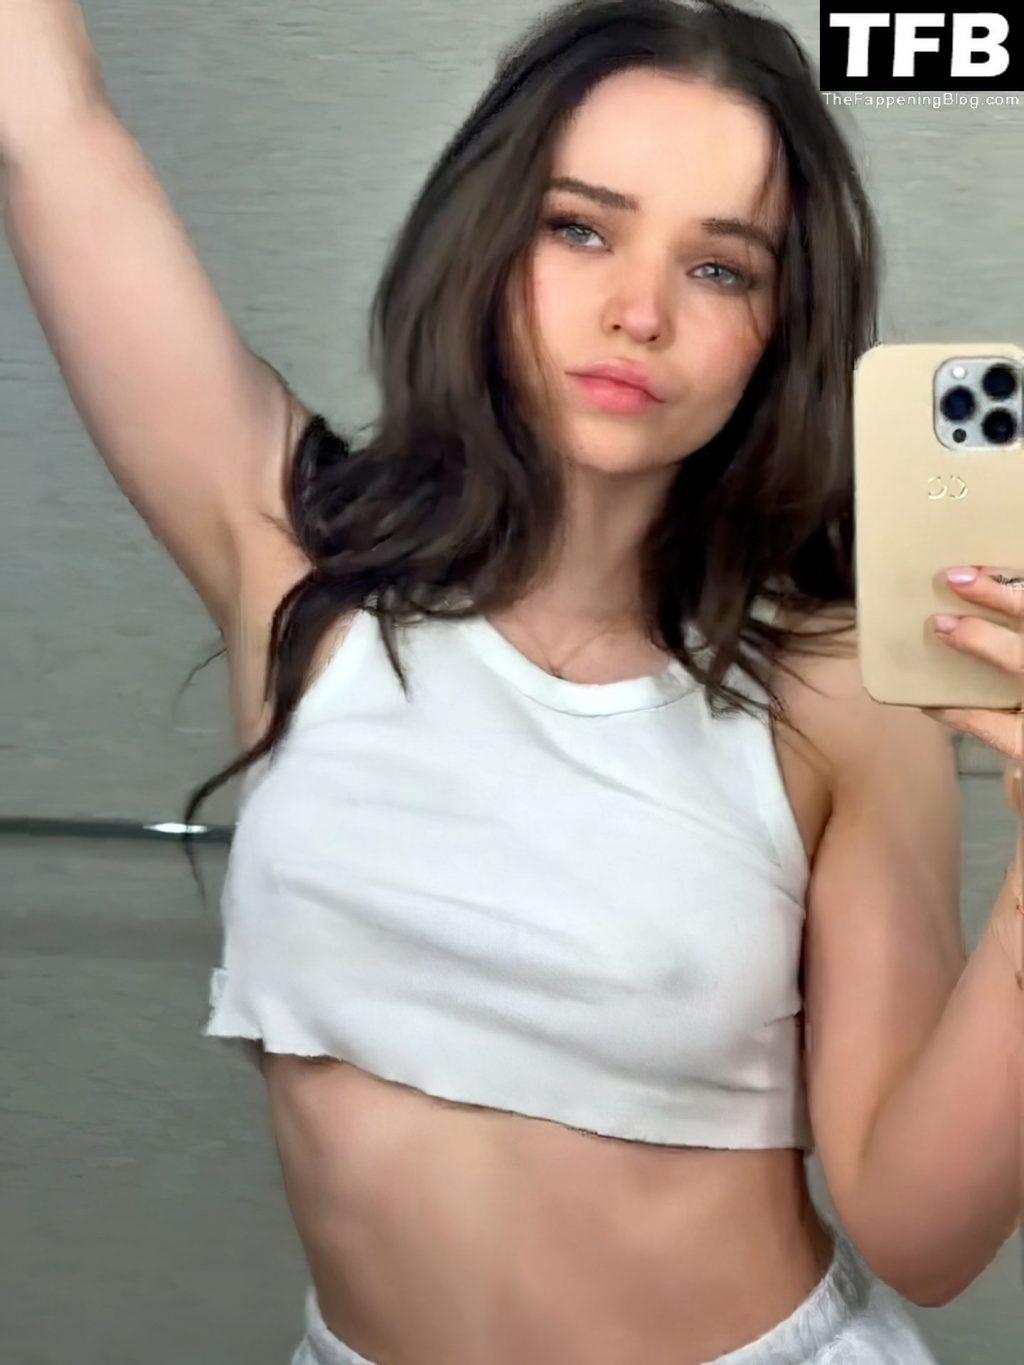 Dove Cameron Shows Her Pokies in a New Selfie Shoot (10 Photos + Video)